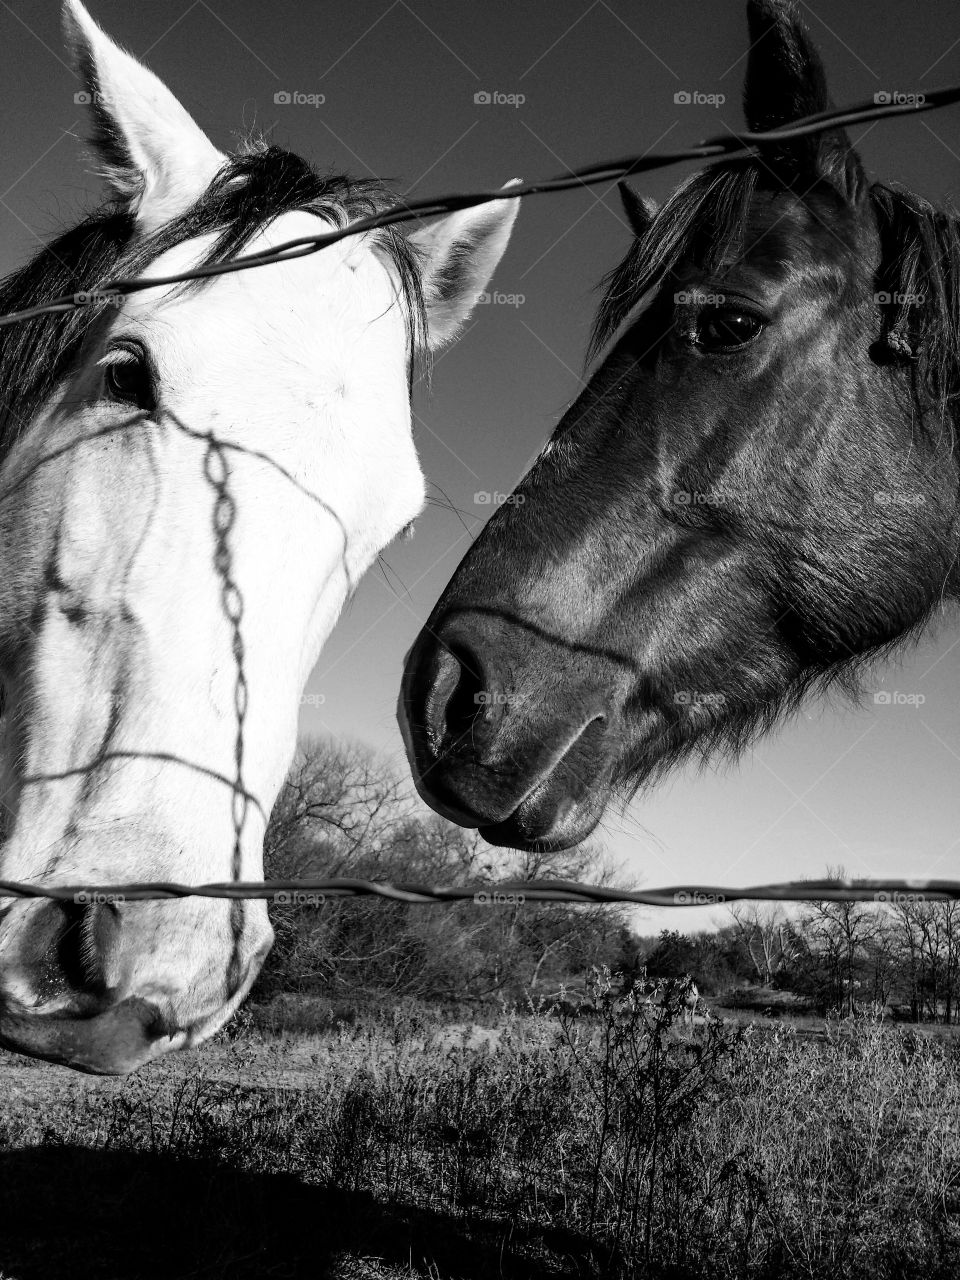 Two horses looking thru a fence in black and white